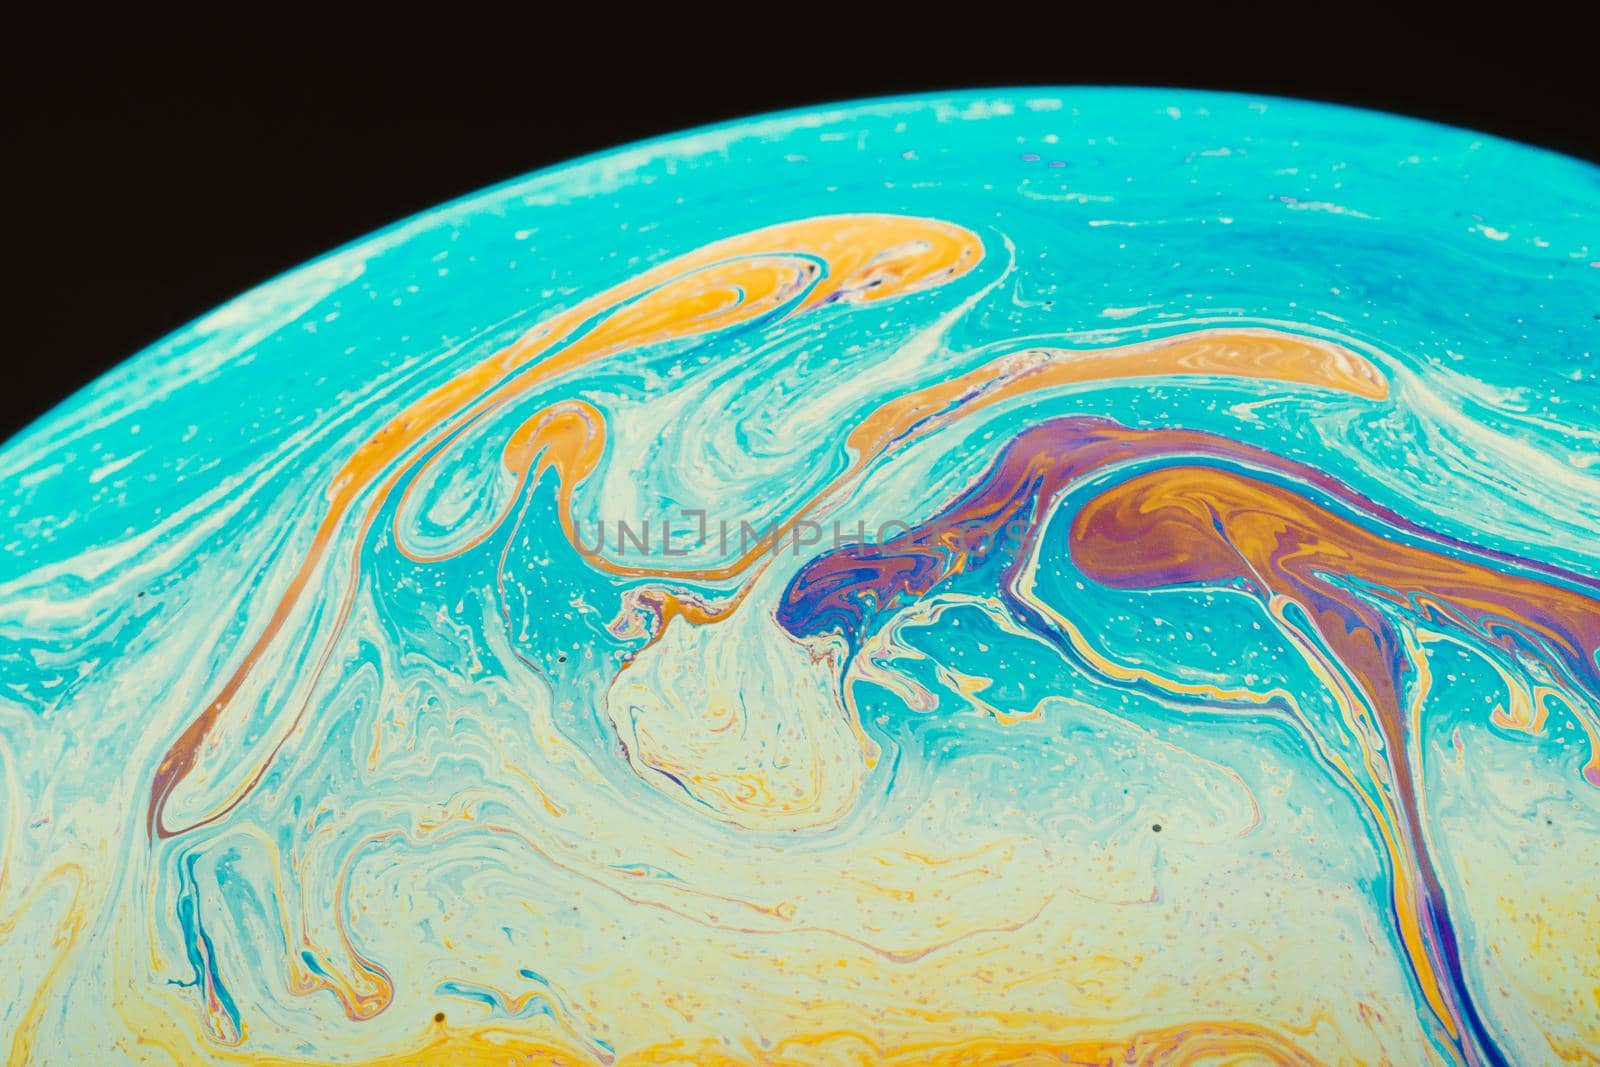 Fluid art made of colorful soap bubble film. Trendy Inkscape blurred background. Alien space planets art. Selective focus.